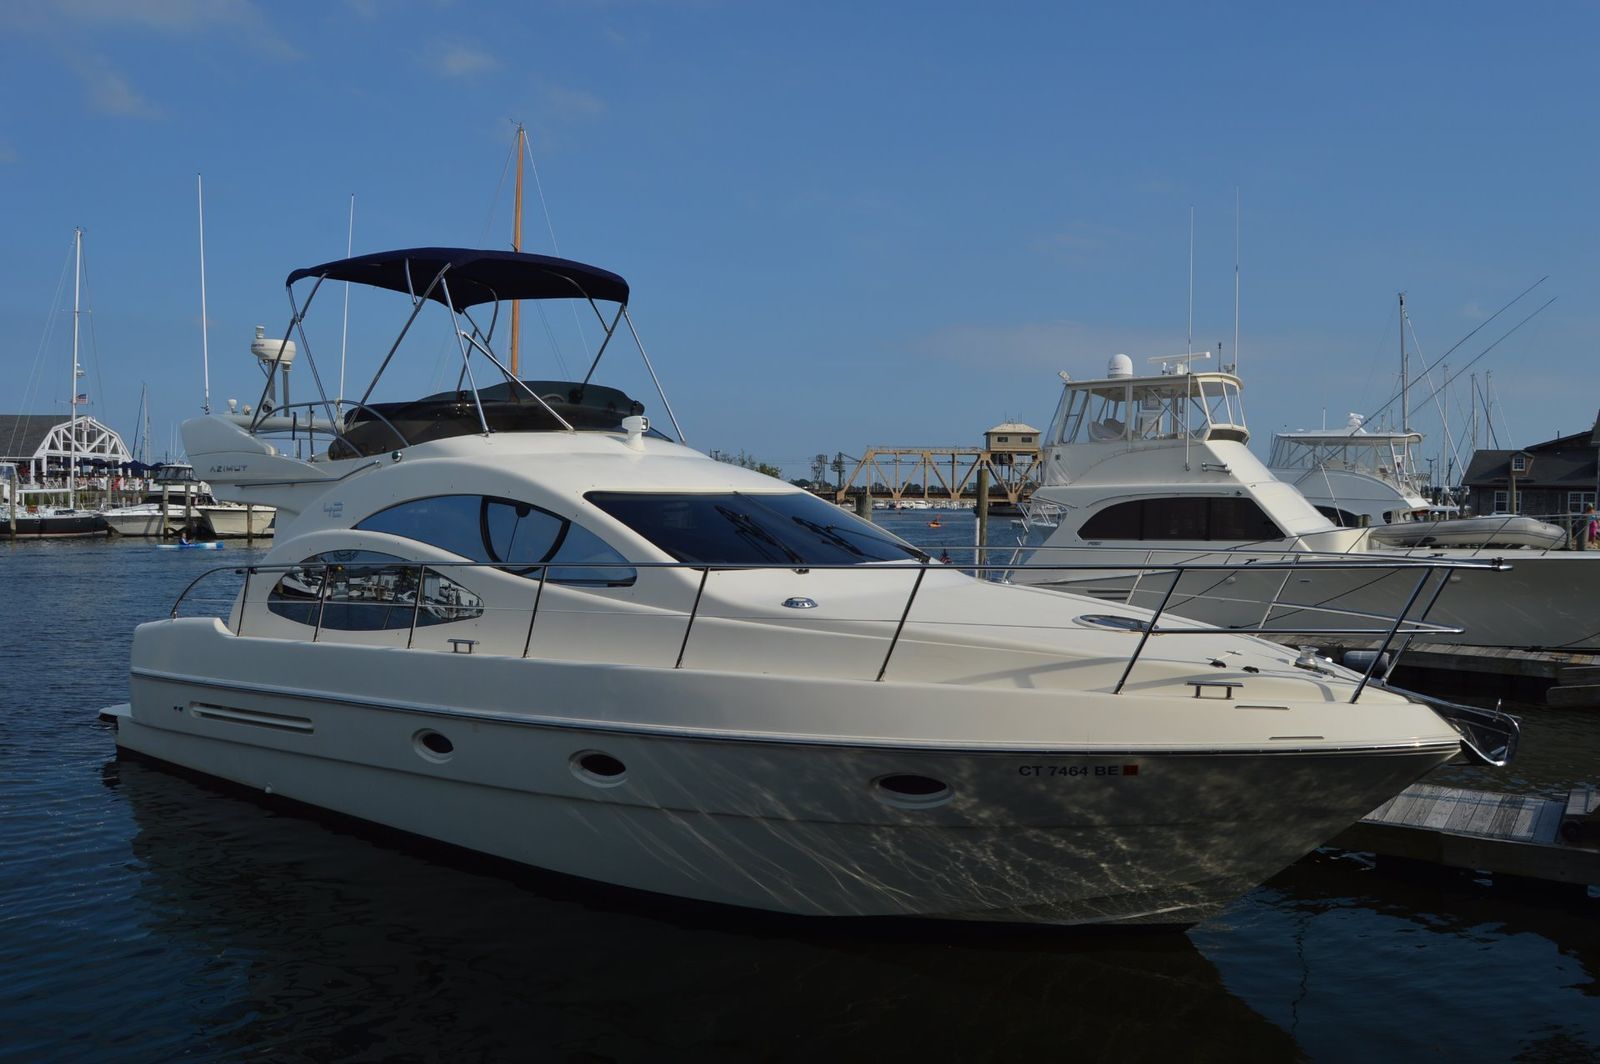 Azimut 42 Cruiser 2005 for sale for $299,995 - Boats-from-USA.com